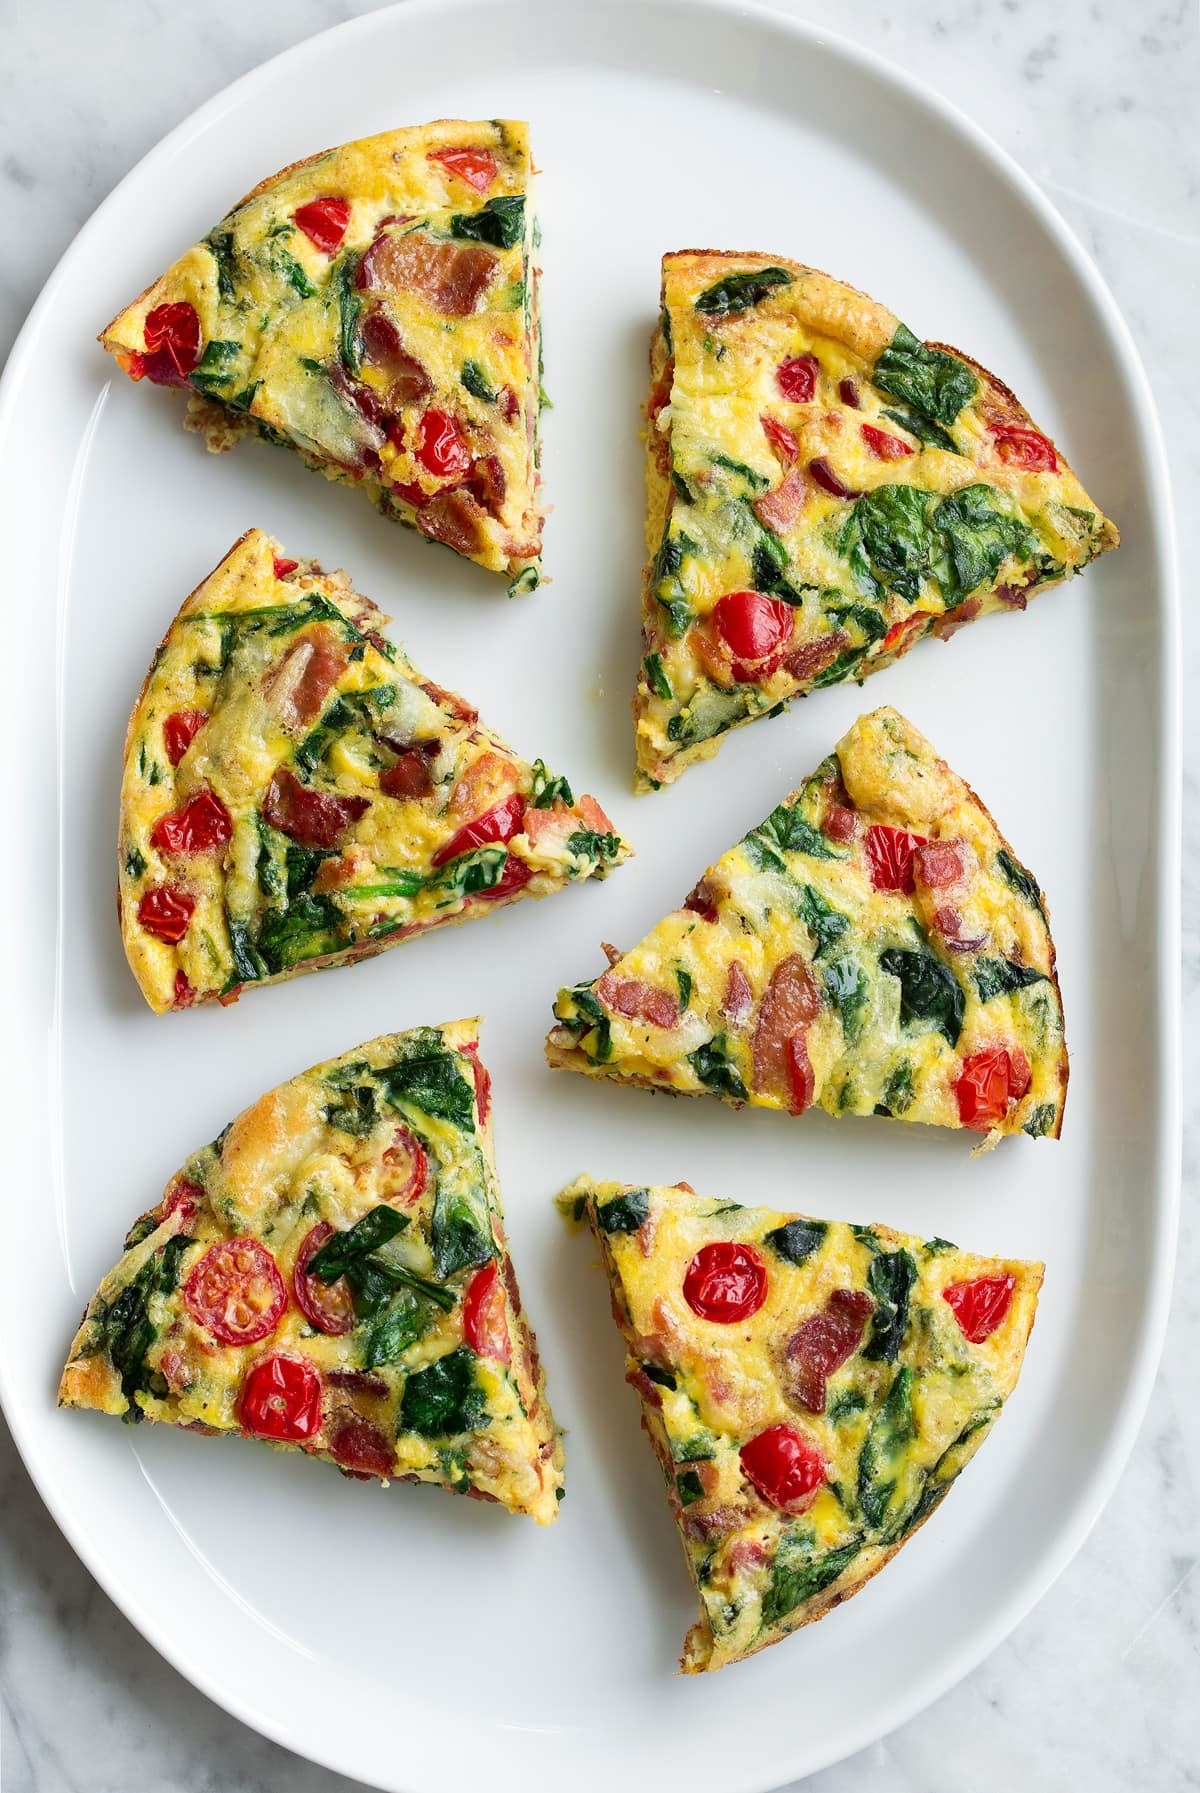 Pieces of frittata on a plate.